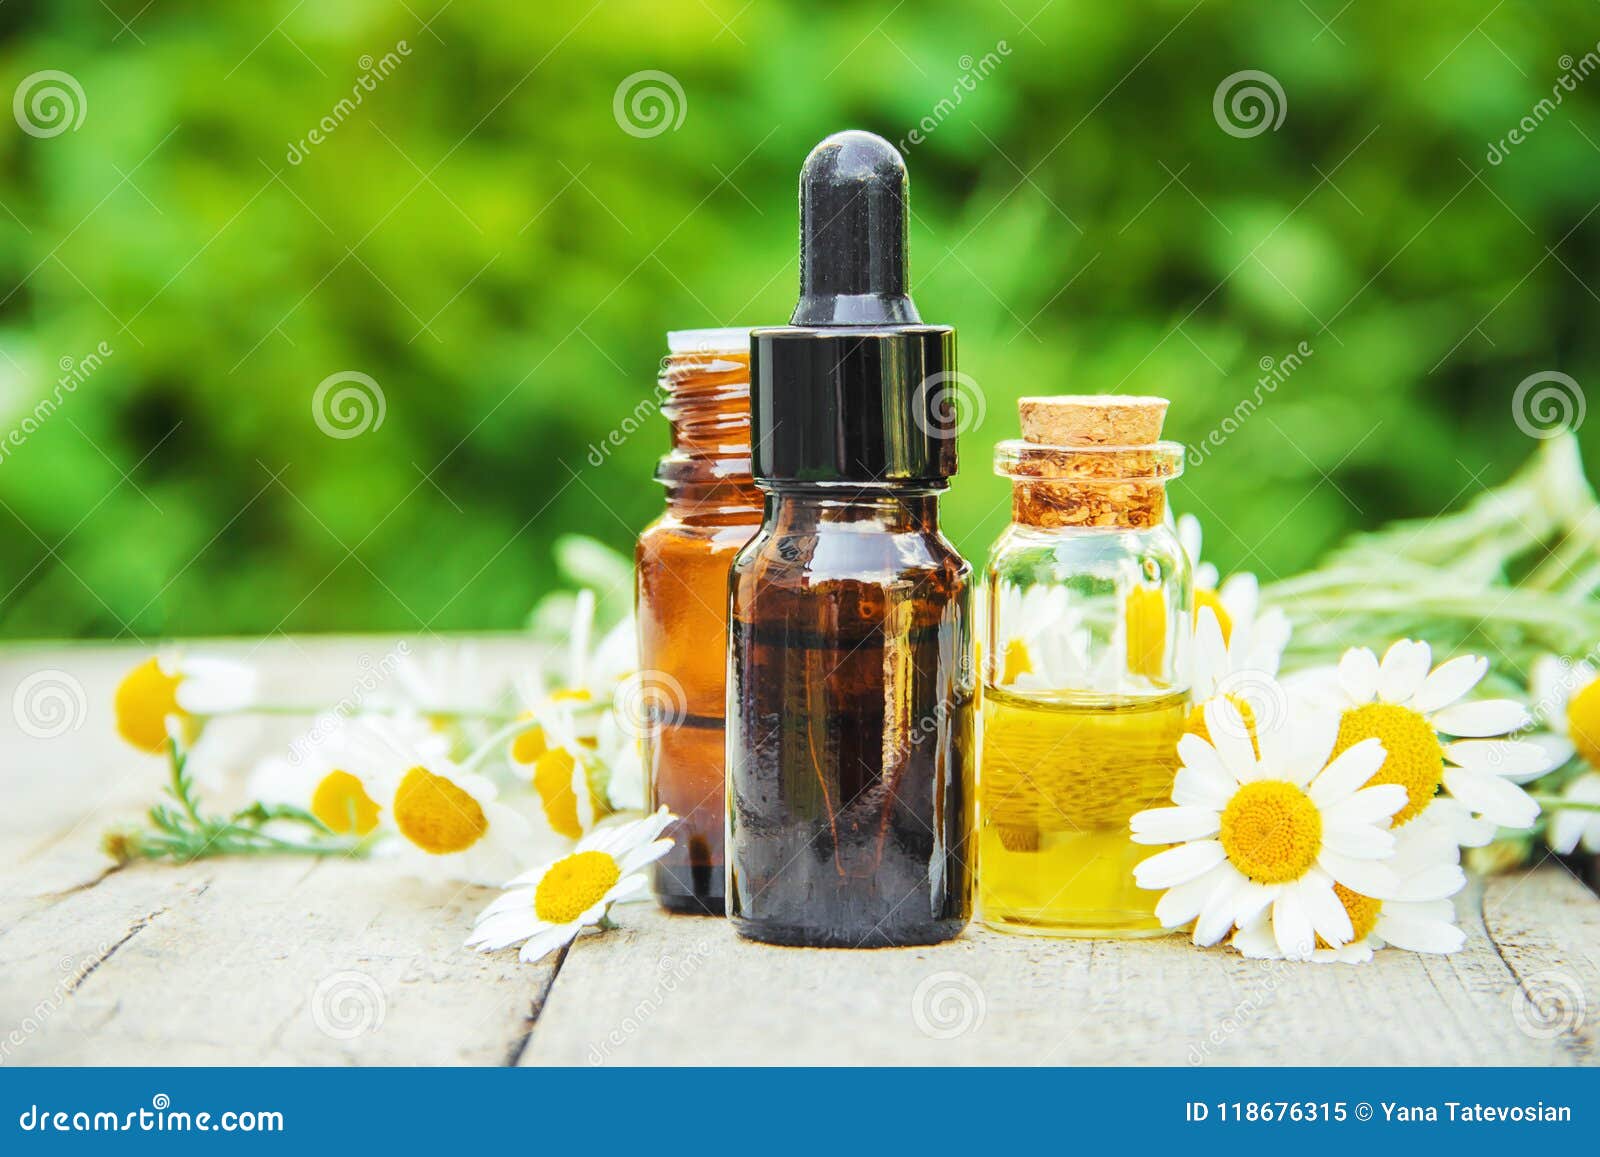 chamomile extract in a small bottle.